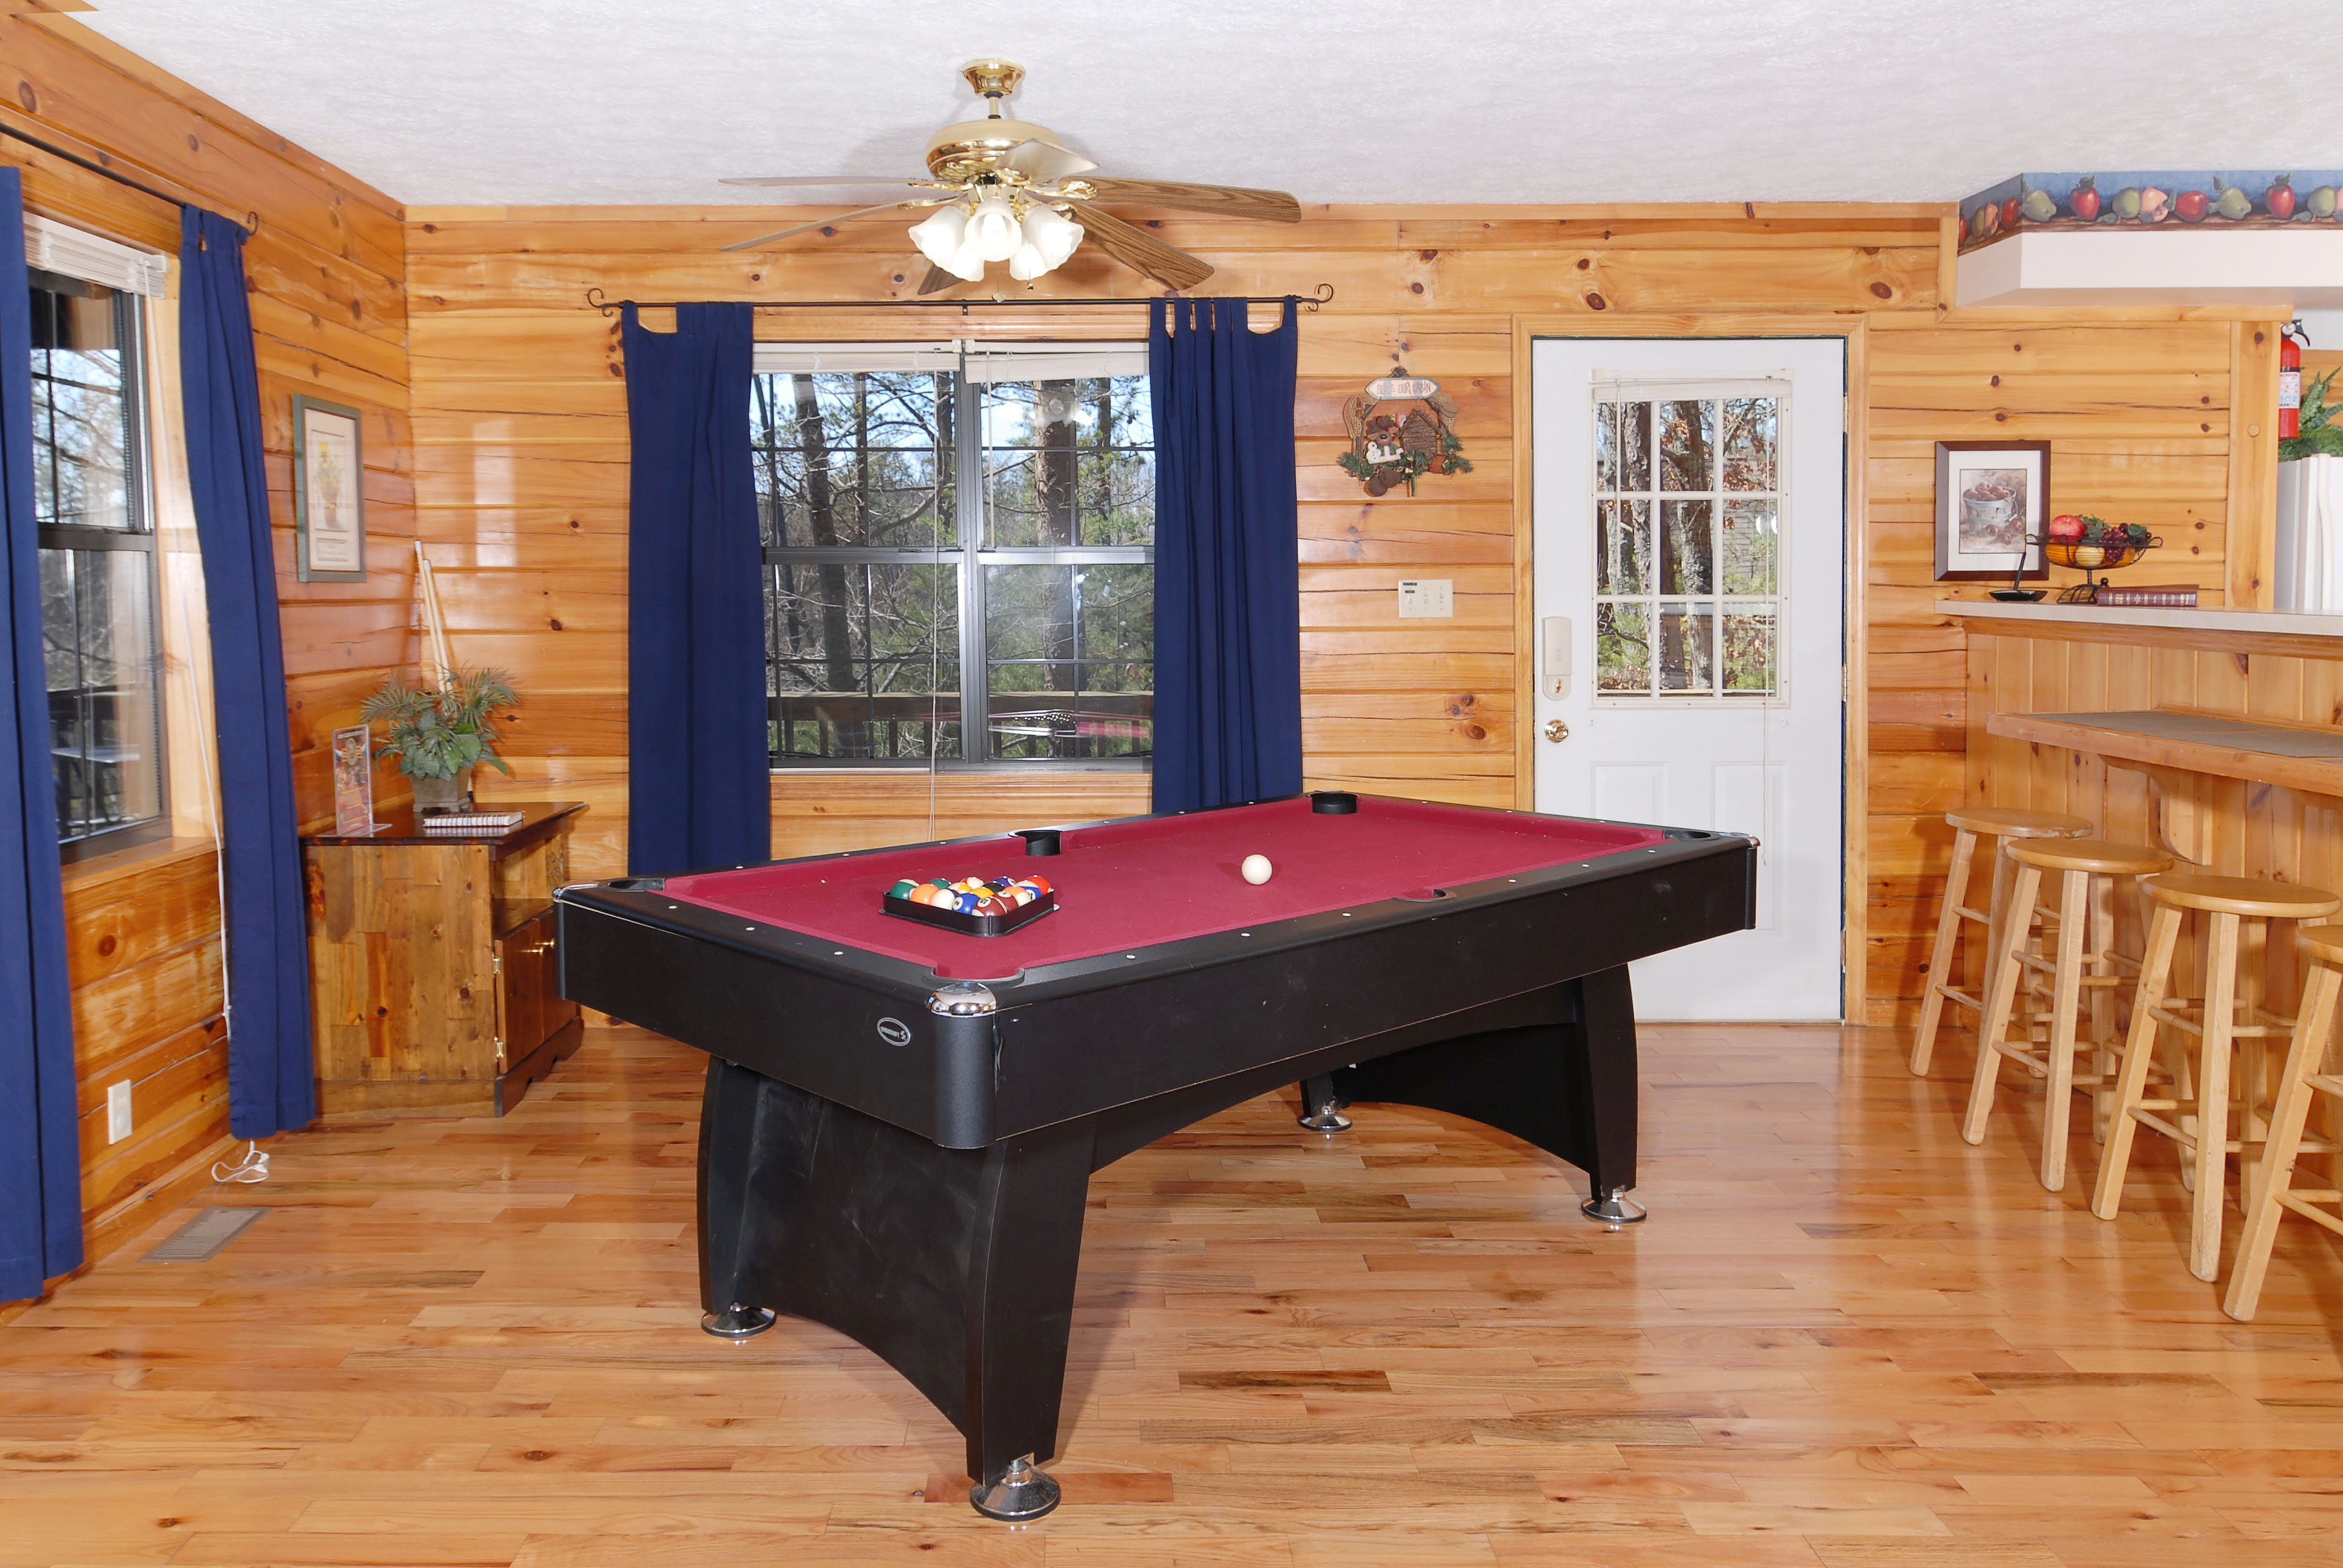 Tennessee Vacation Two Bedroom Rental Pool Table